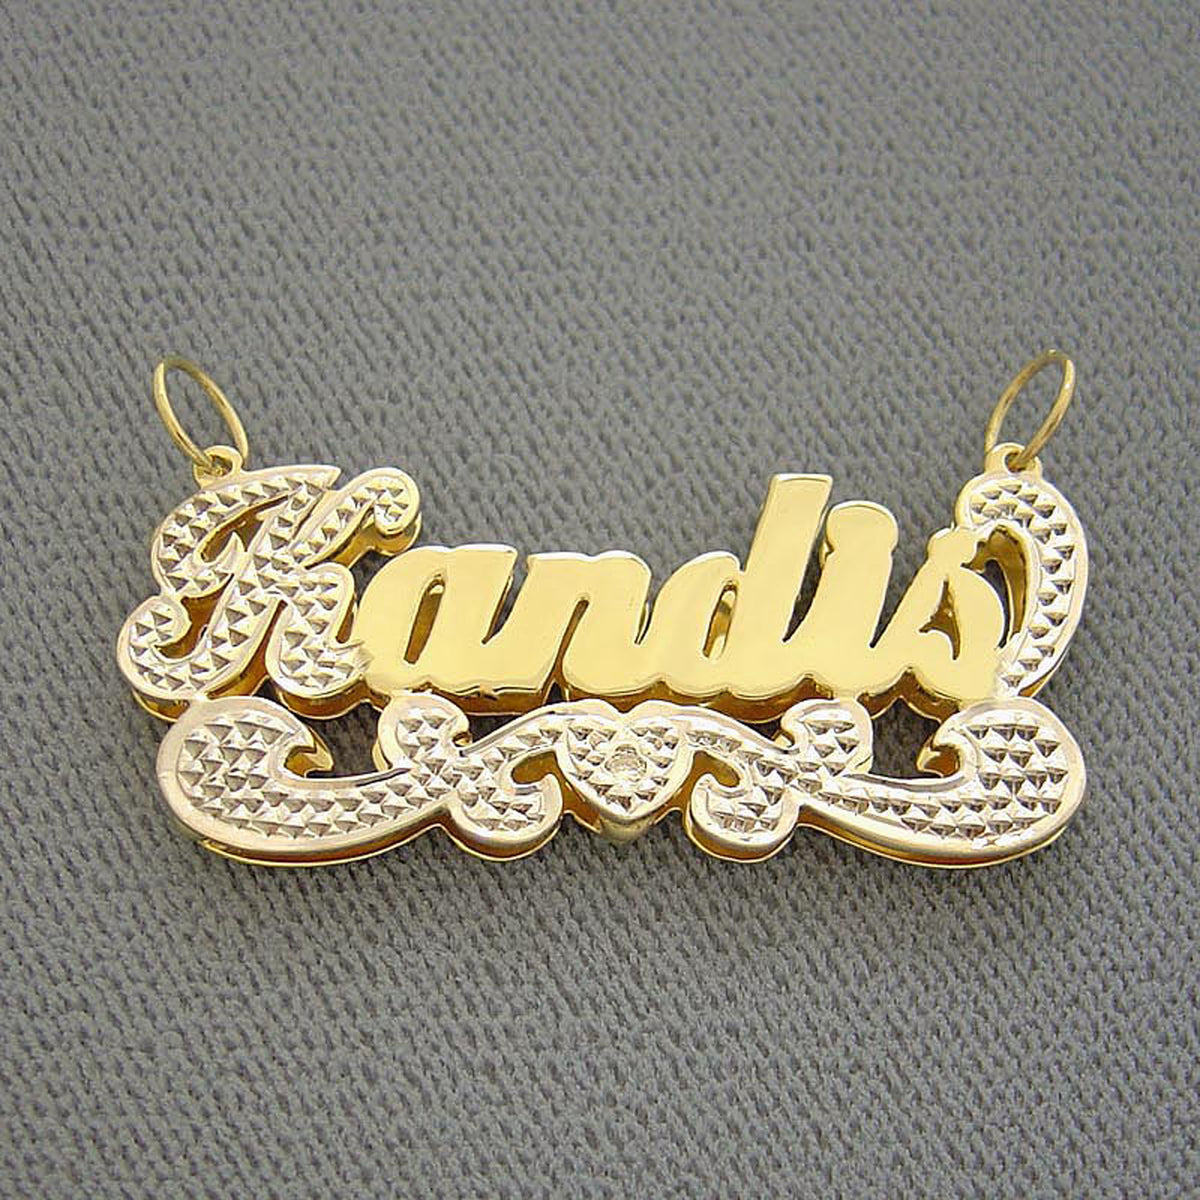 Personalized Necklace Gold Name Pendant 2 Tone Diamond Accent 3D Double Plate Charm Jewelry ND16